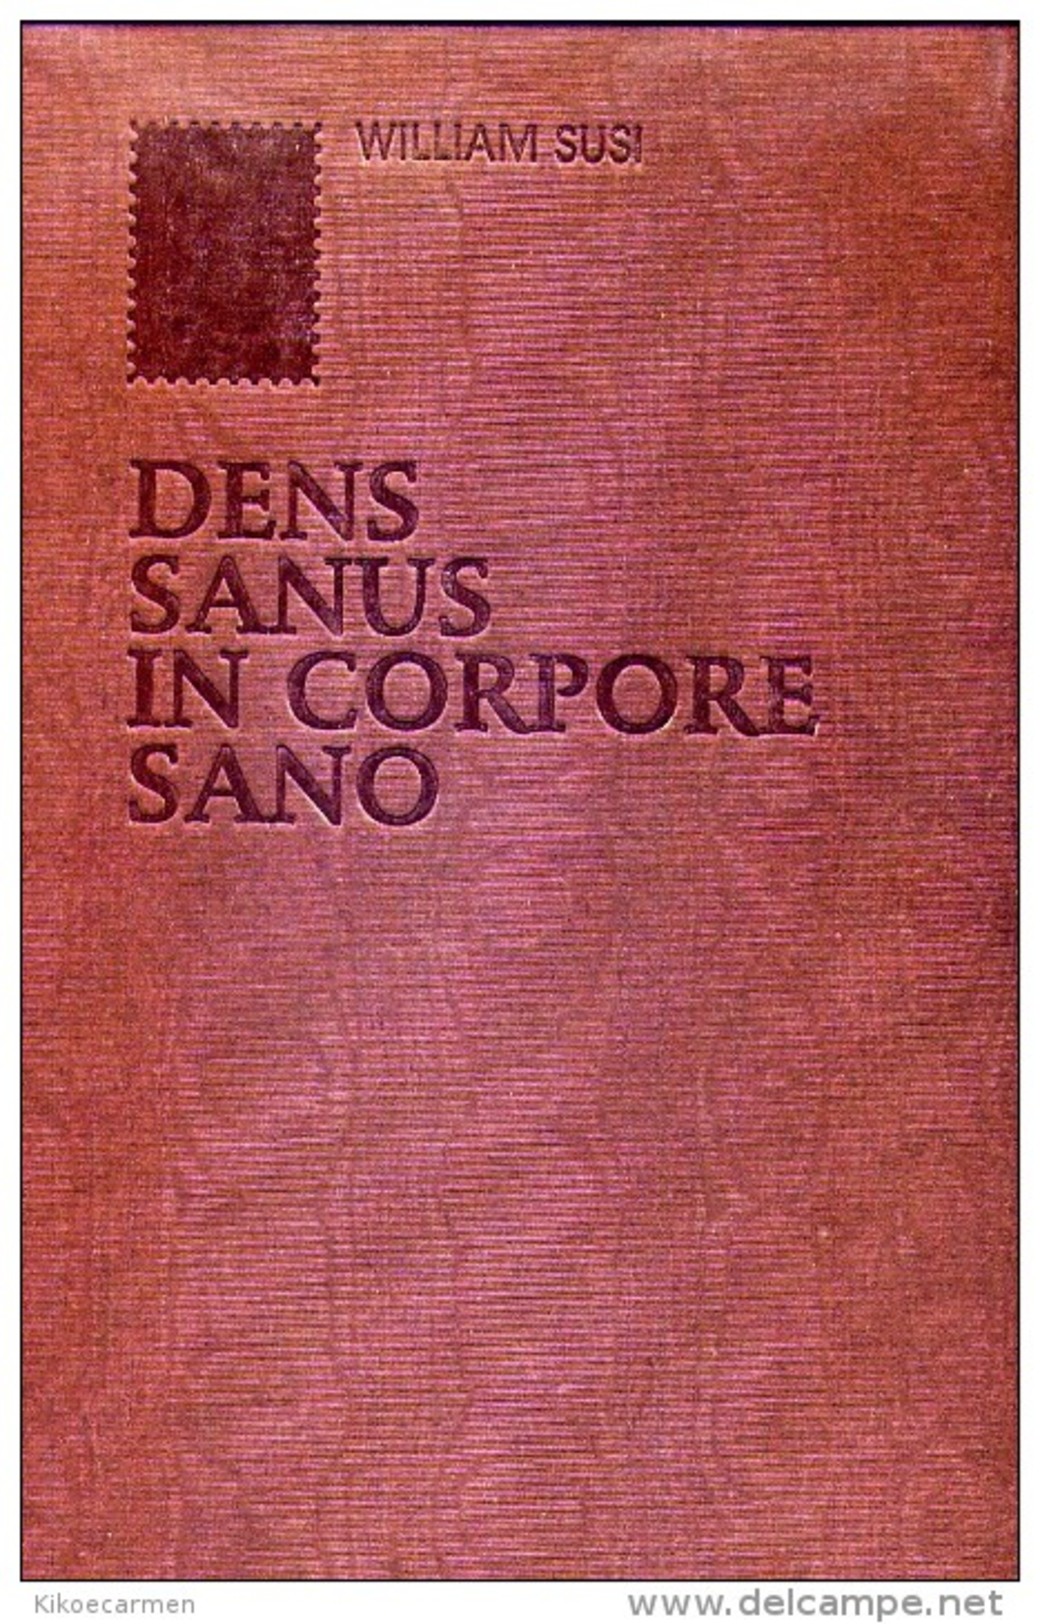 DENTISTRY IN STAMPS, DENS SANUS 192 Black And White Pages- Dental Dent Teeth Tooth Mouth Medicine Zahn Diente Dentale - Motive